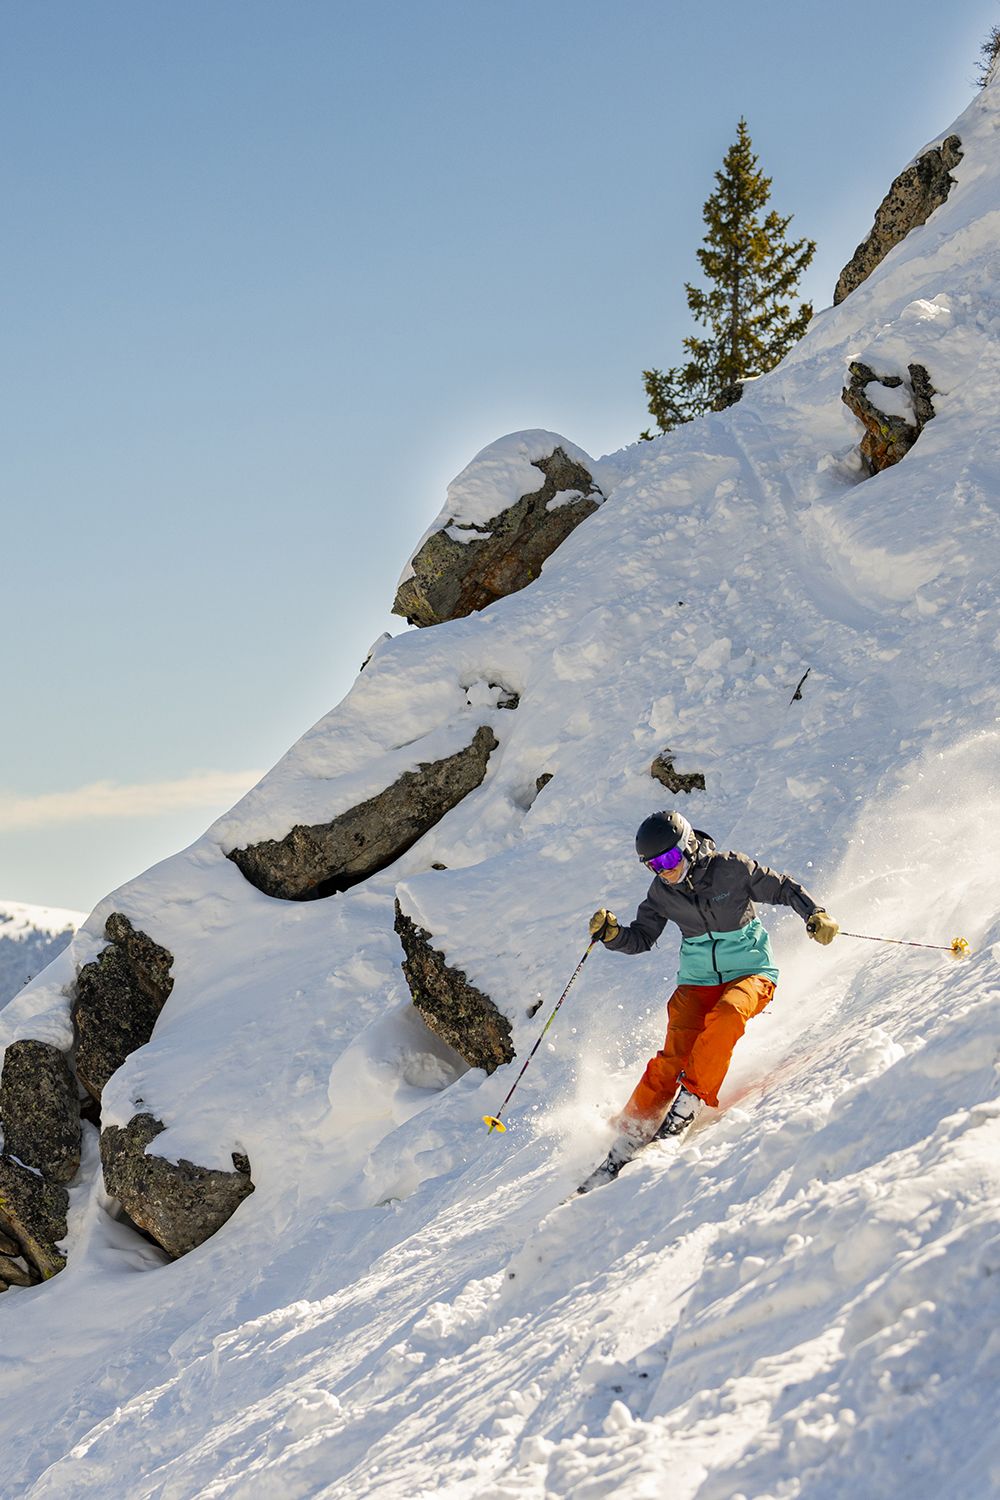 A woman skiing extreme terrain on a sunny winter day in Crested Butte, Colorado.